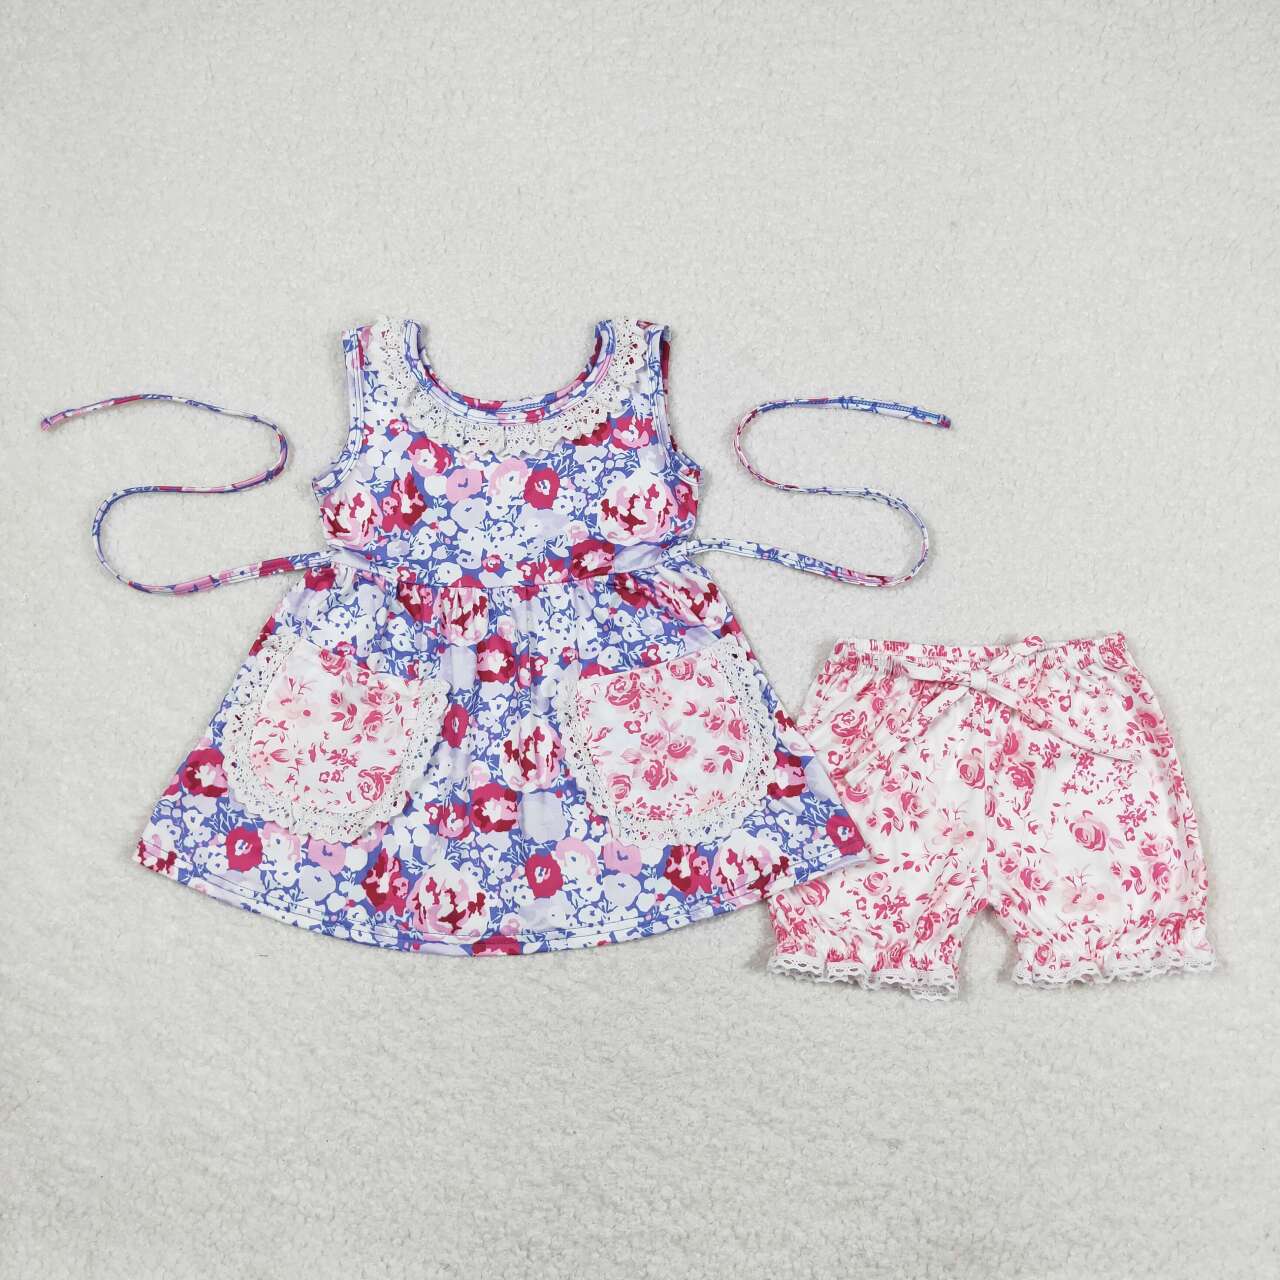 Flowers Print Pockets Girls Summer Clothes Set Sisters Wear